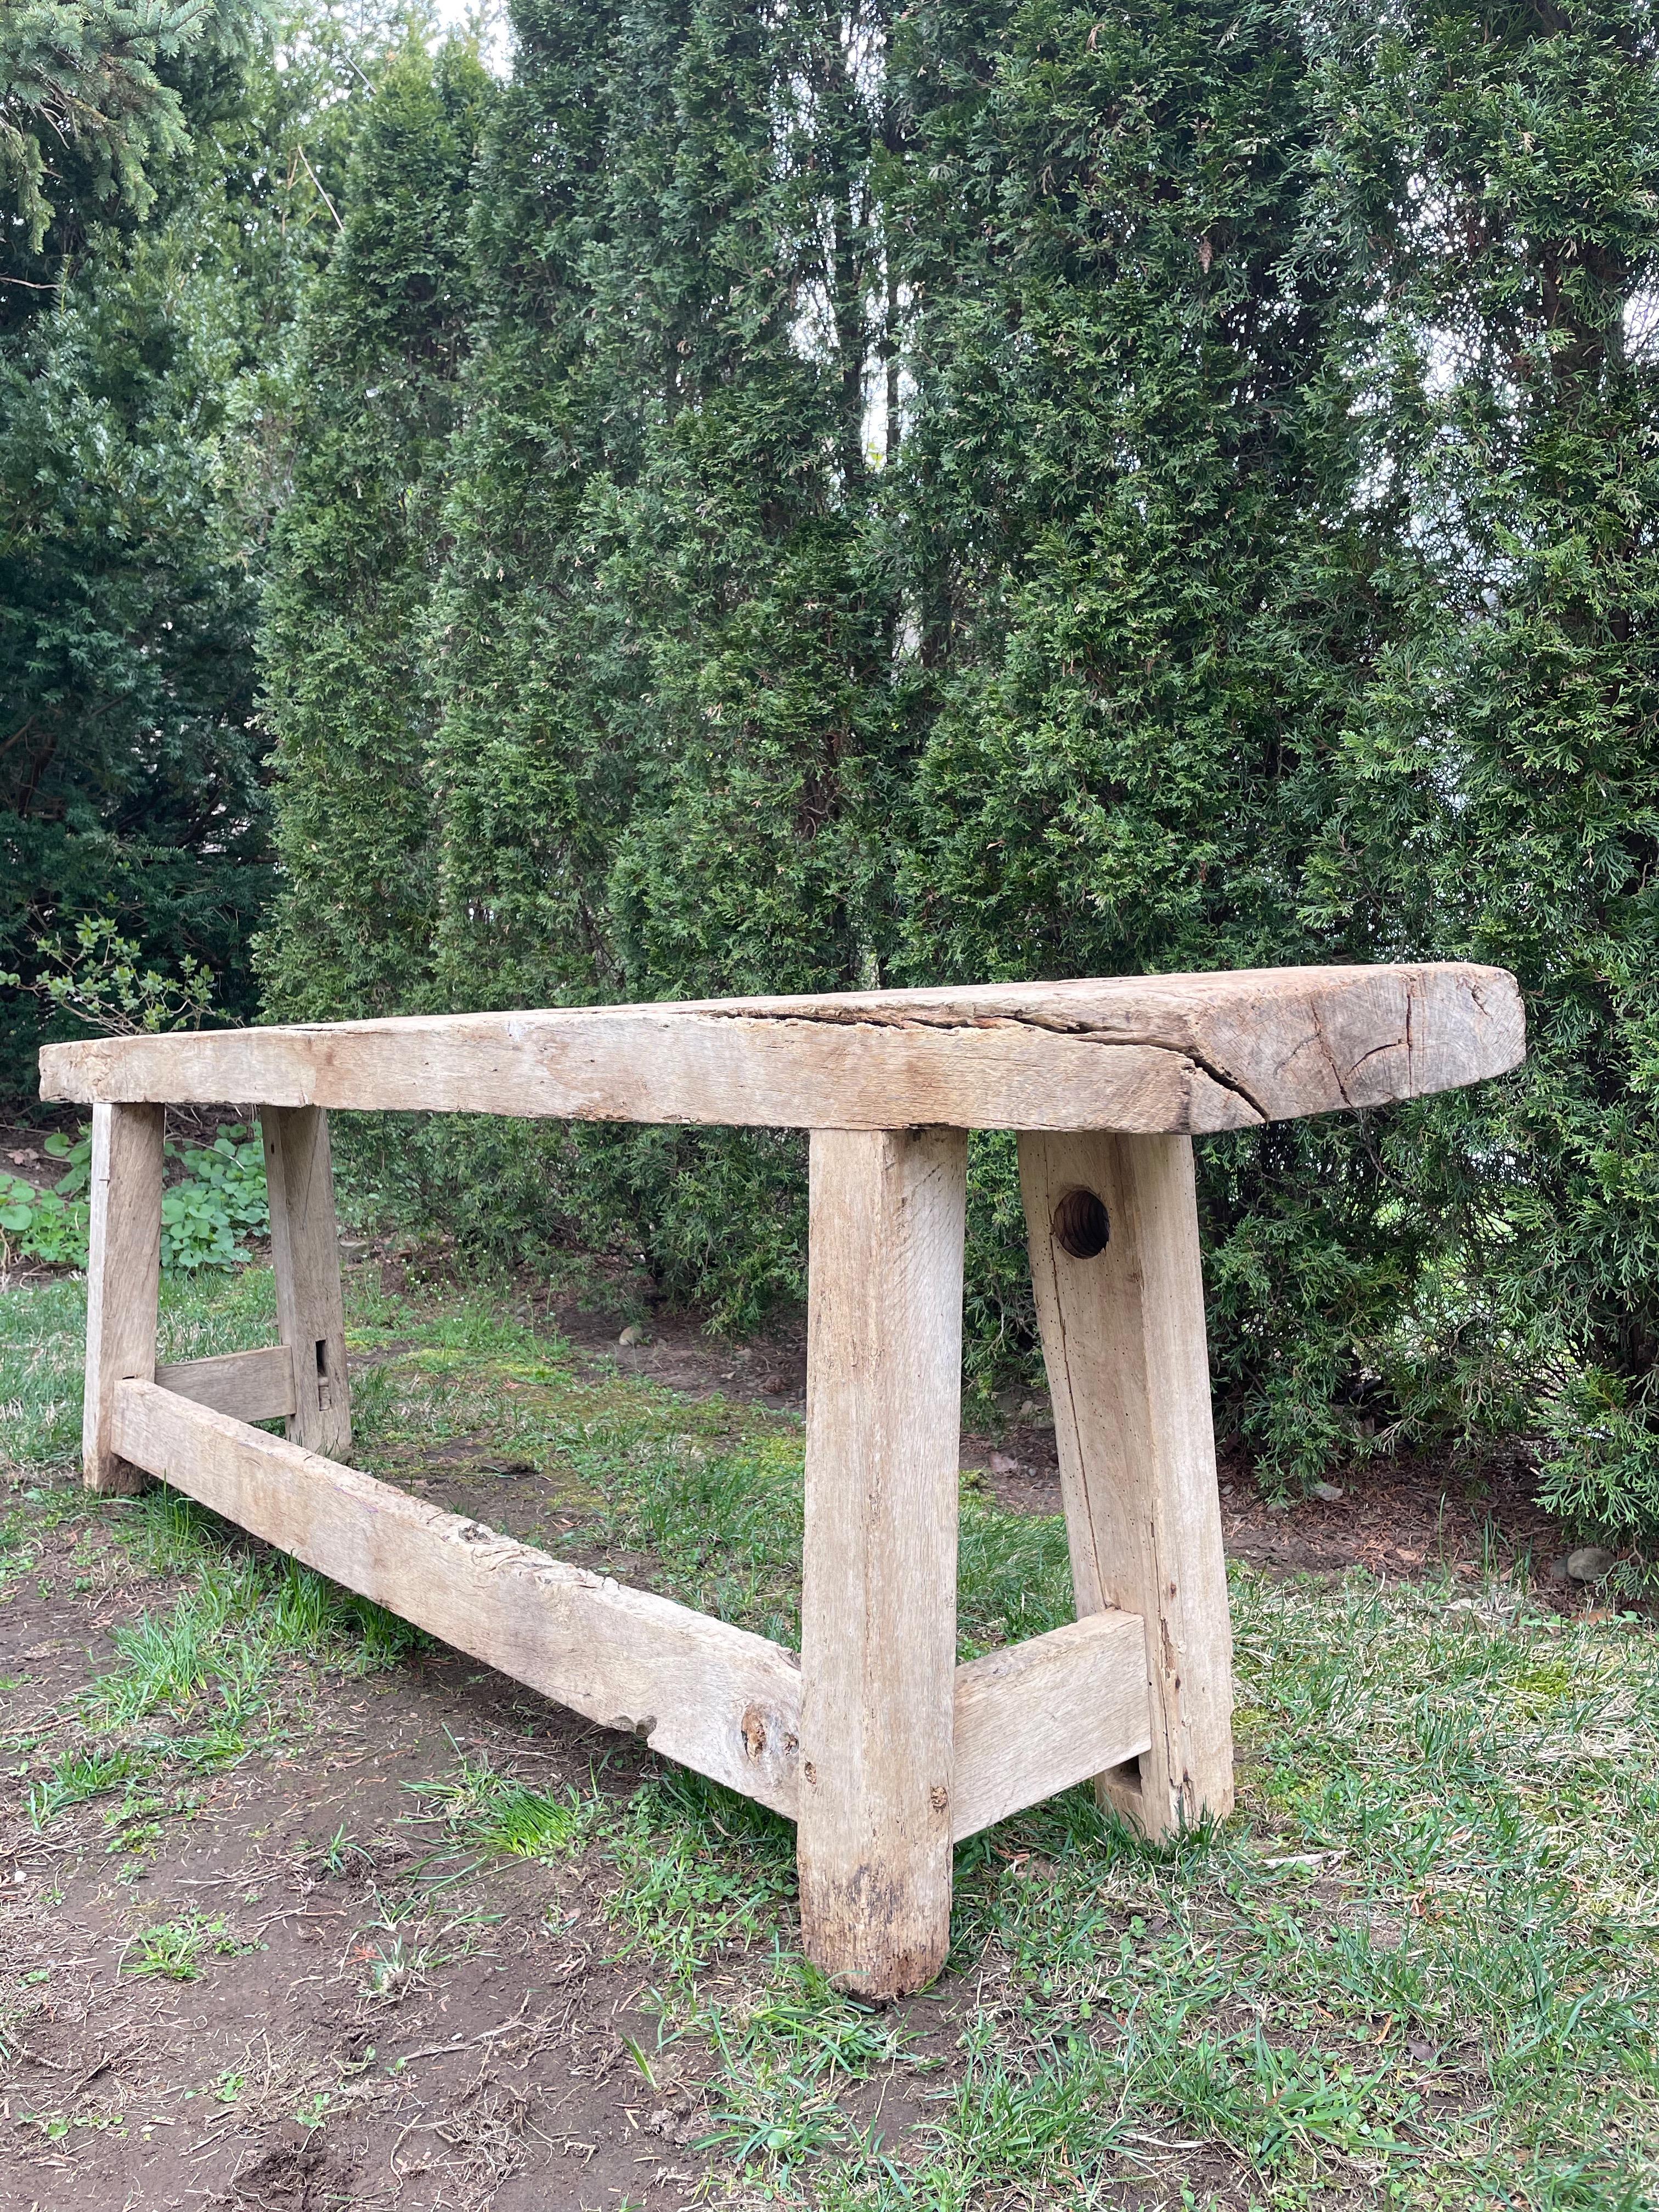 We are always in search of good hand-made primitive tables with a Wabi Sabi feel and this is a beauty. Made of thick French oak and with a lovely light color, it would be stunning in an entrance foyer or as a sofa table. It has a few nibbles to the